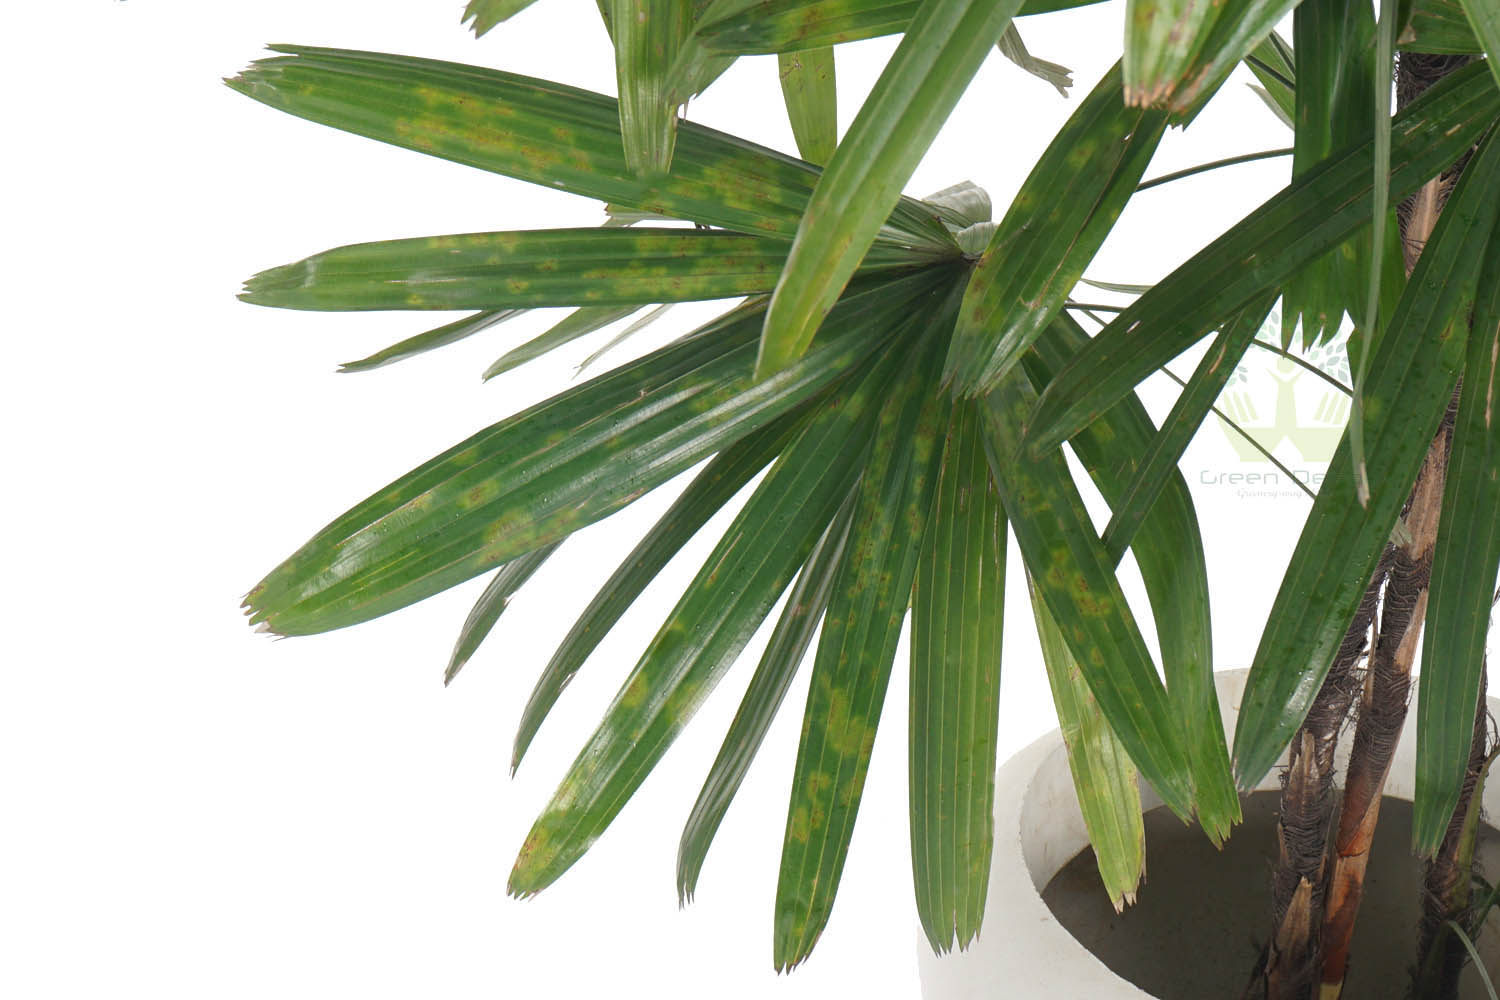 Buy Broadleaf Lady Palm Plants Leaves View , White Pots and seeds in Delhi NCR by the best online nursery shop Greendecor.